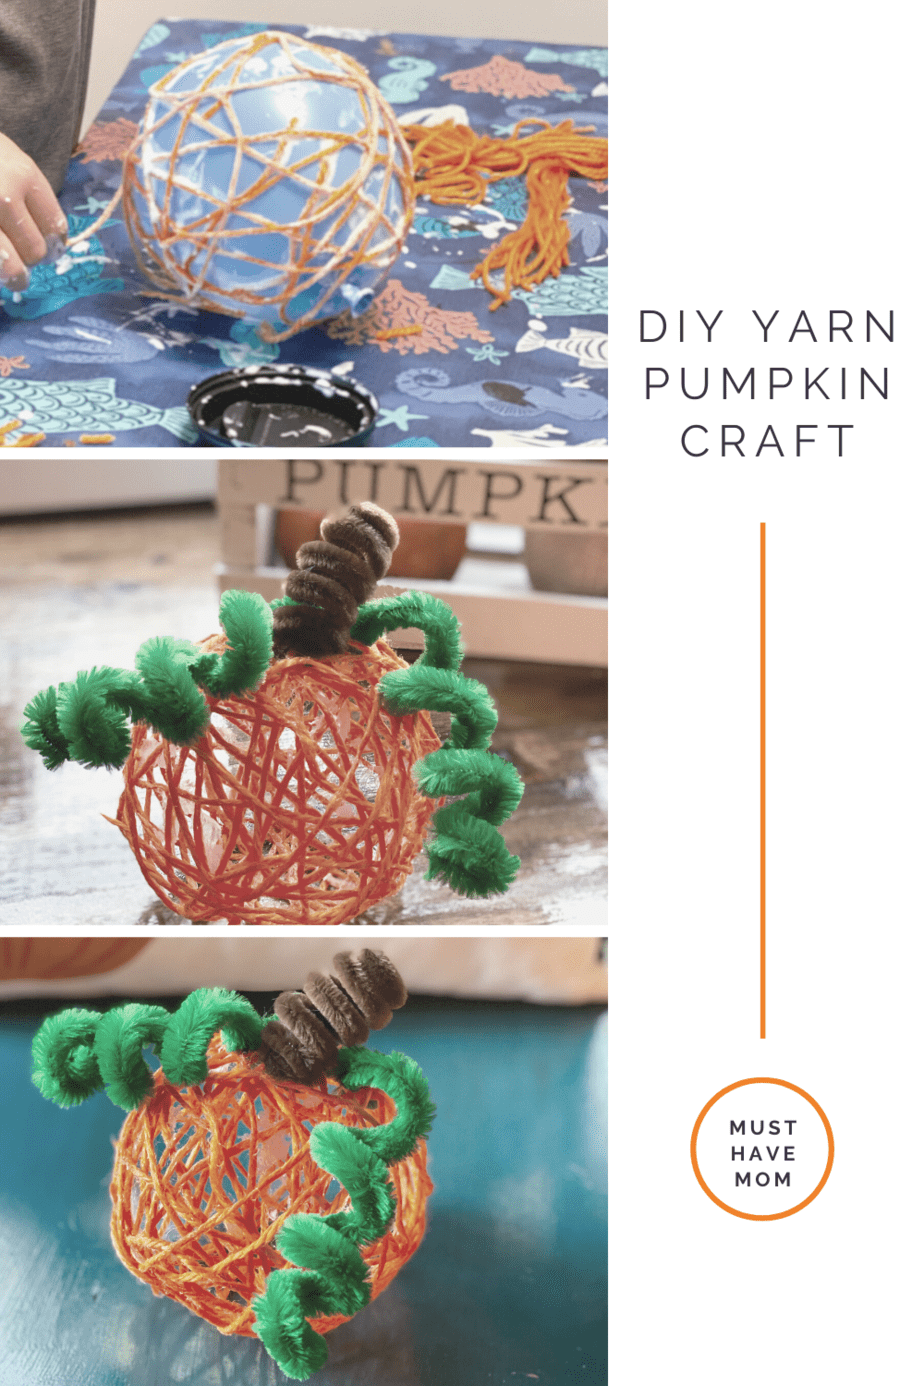 This DIY Yarn Pumpkin Craft makes an adorable craft that everyone is sure to want to help with. Decorate your home with these yarn pumpkins. #MustHaveMom #yarn #craft #pumpkin #DIY #falldecor 